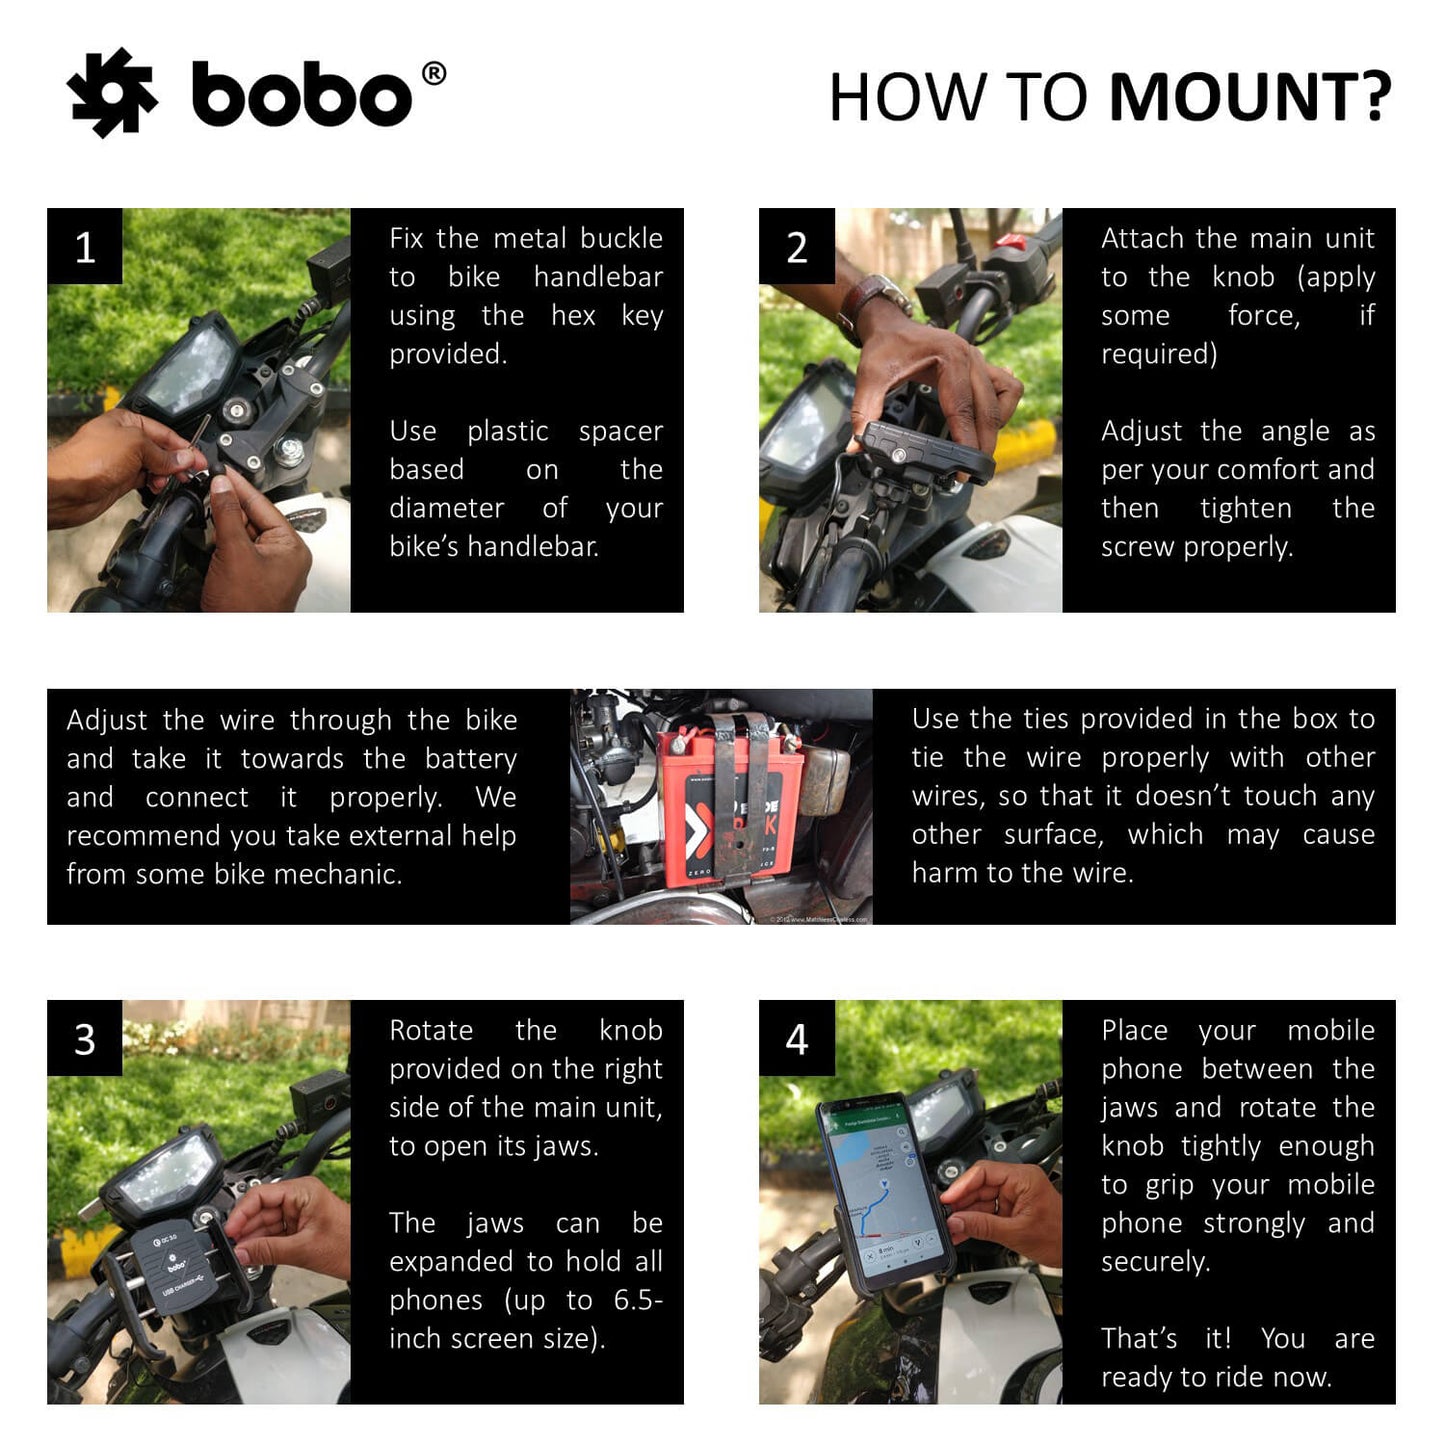 Bobo Gears BOBO BM1 Jaw-Grip Bike Phone Holder (with fast USB 3.0 charger) Motorcycle Mobile Mount